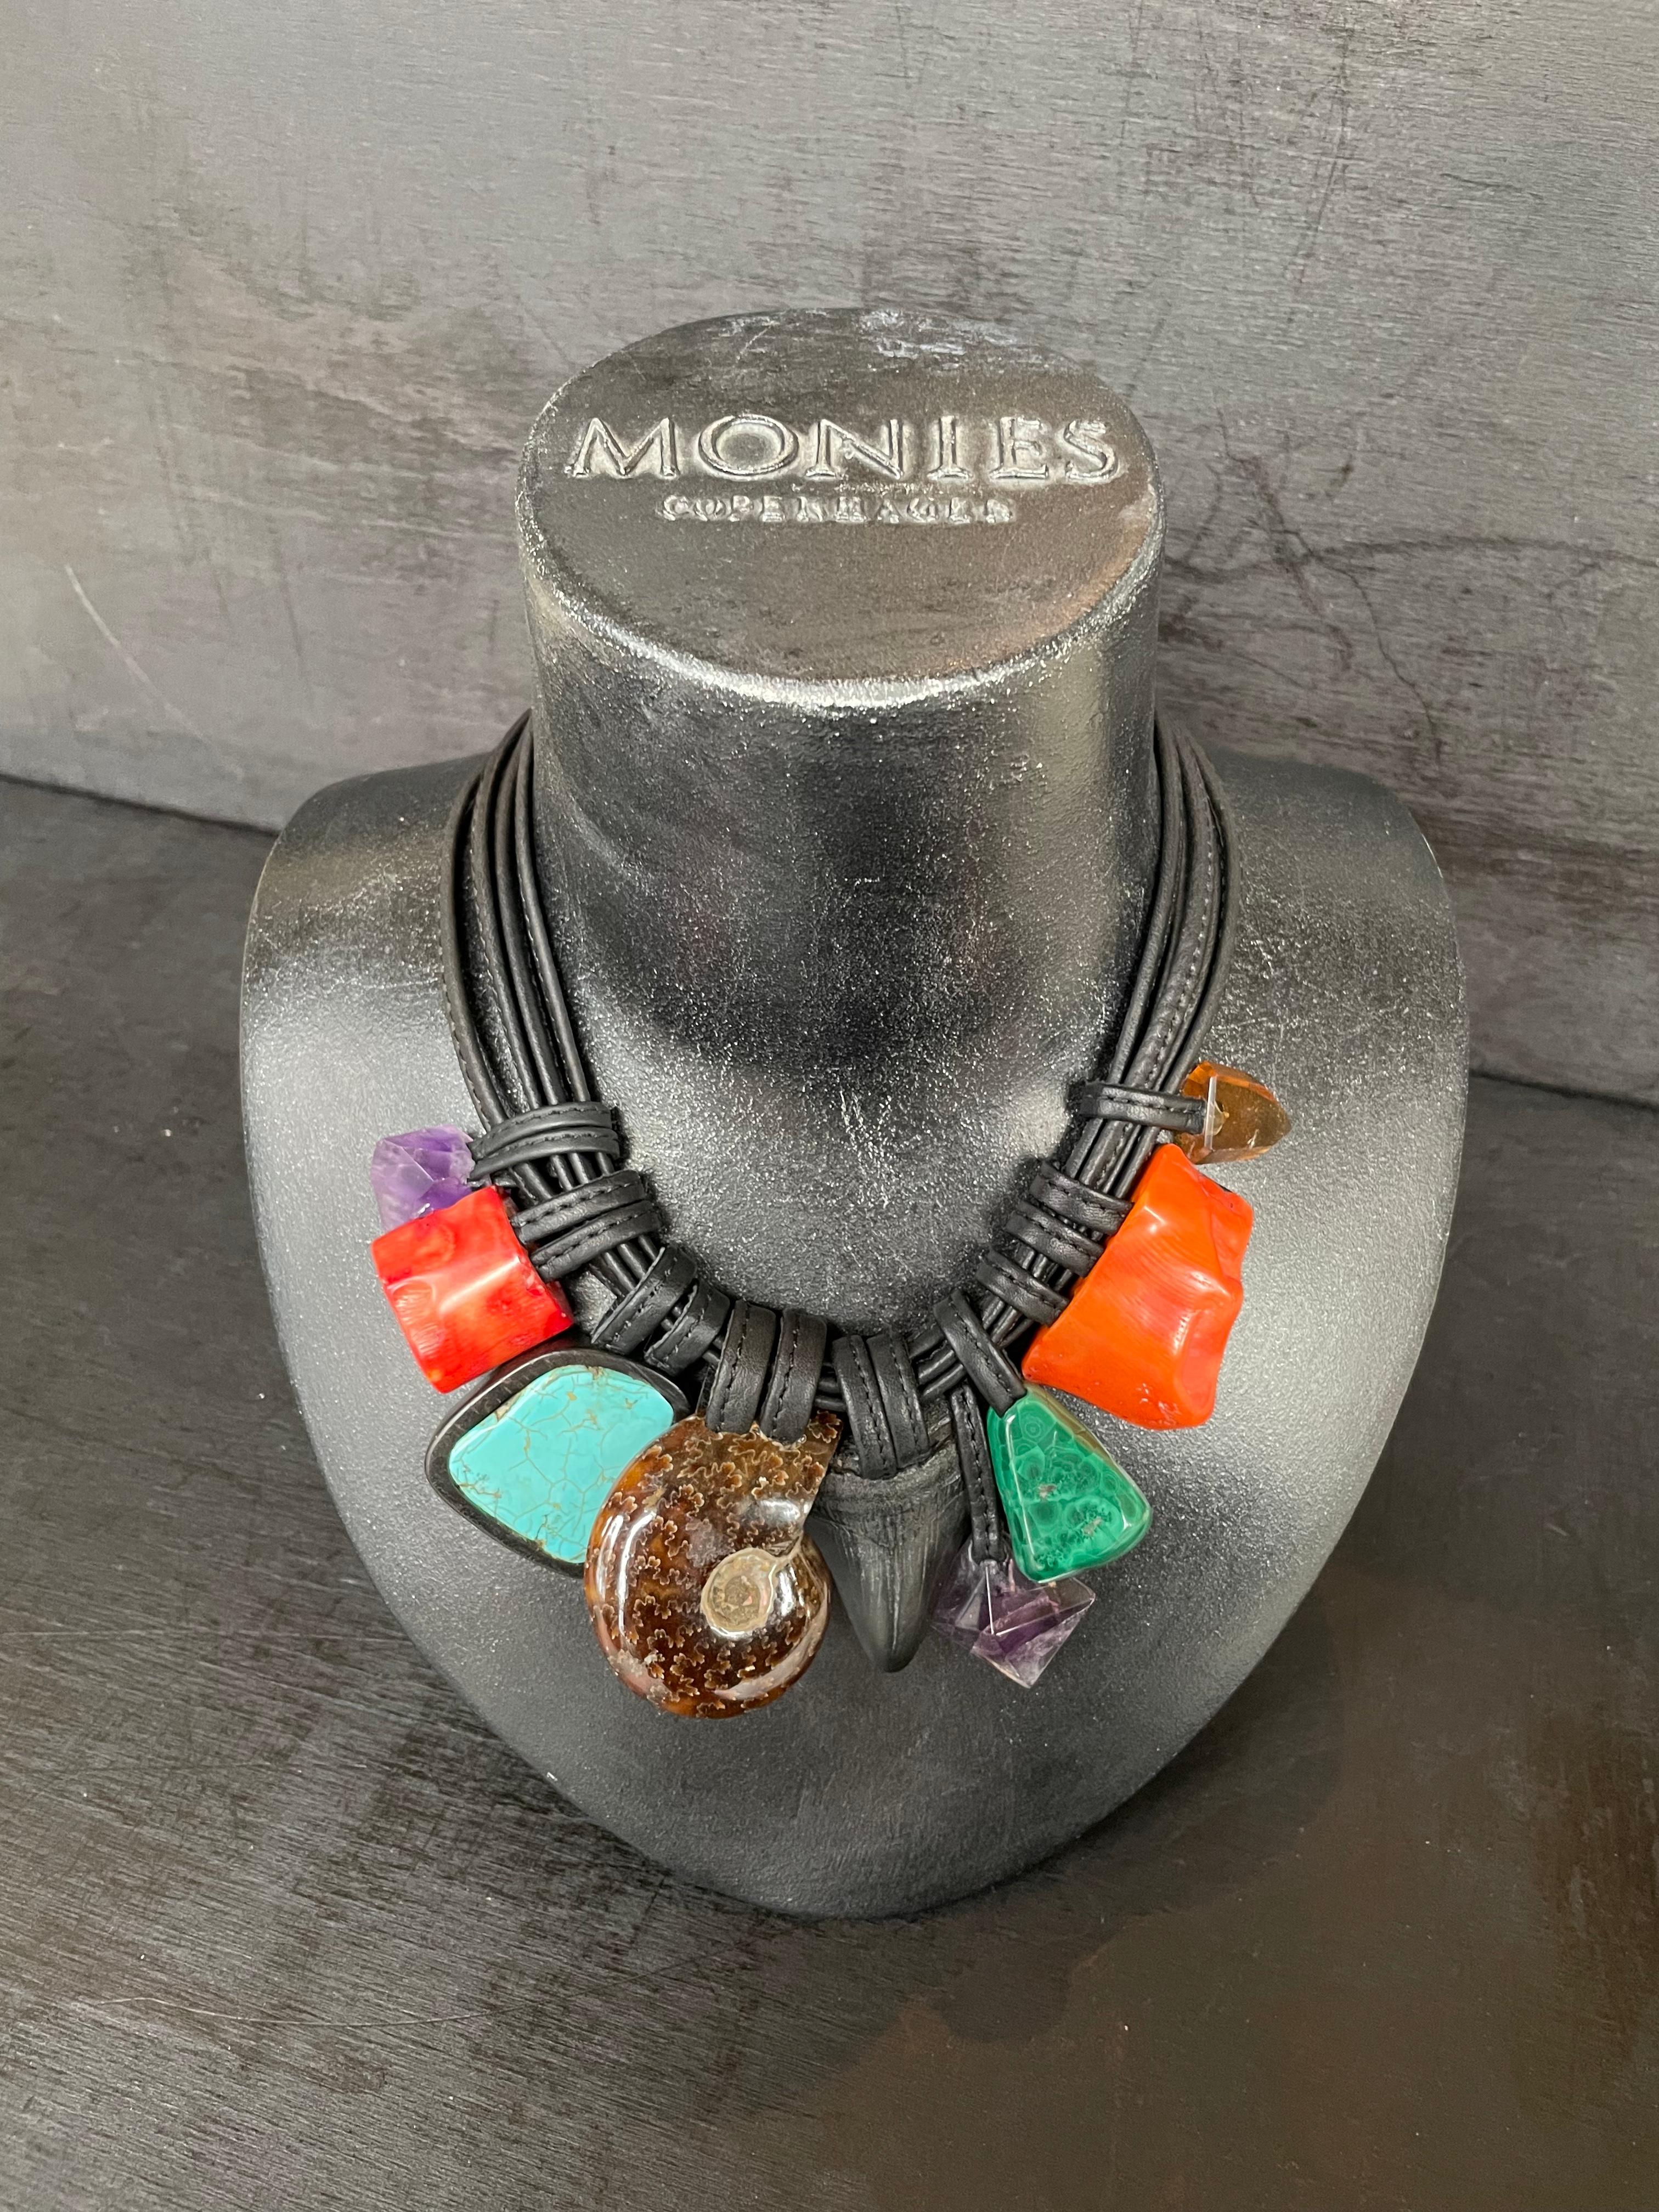 One-of-a-kind statement necklace from the Danish jewellery brand, Monies. 
Made in amethyst, turquoise, coral, ammonite, petrified shark tooth and malachite, with a leather clasp. 

Handcrafted in the Monies Atelier in Copenhagen.